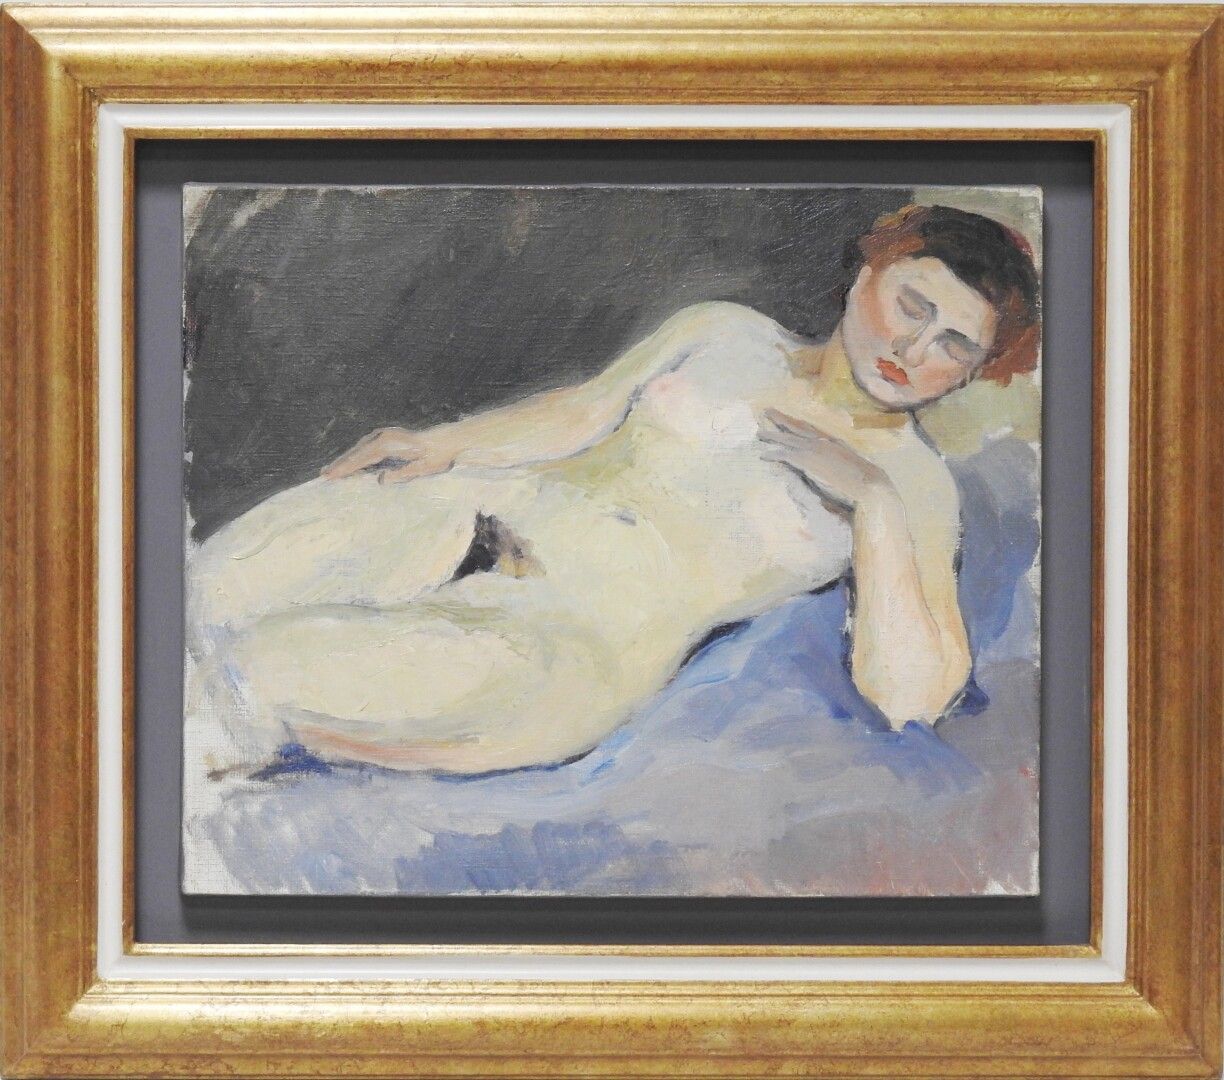 Null ANONYMOUS school of the 20th century

Nude with hand on the heart

Oil on c&hellip;